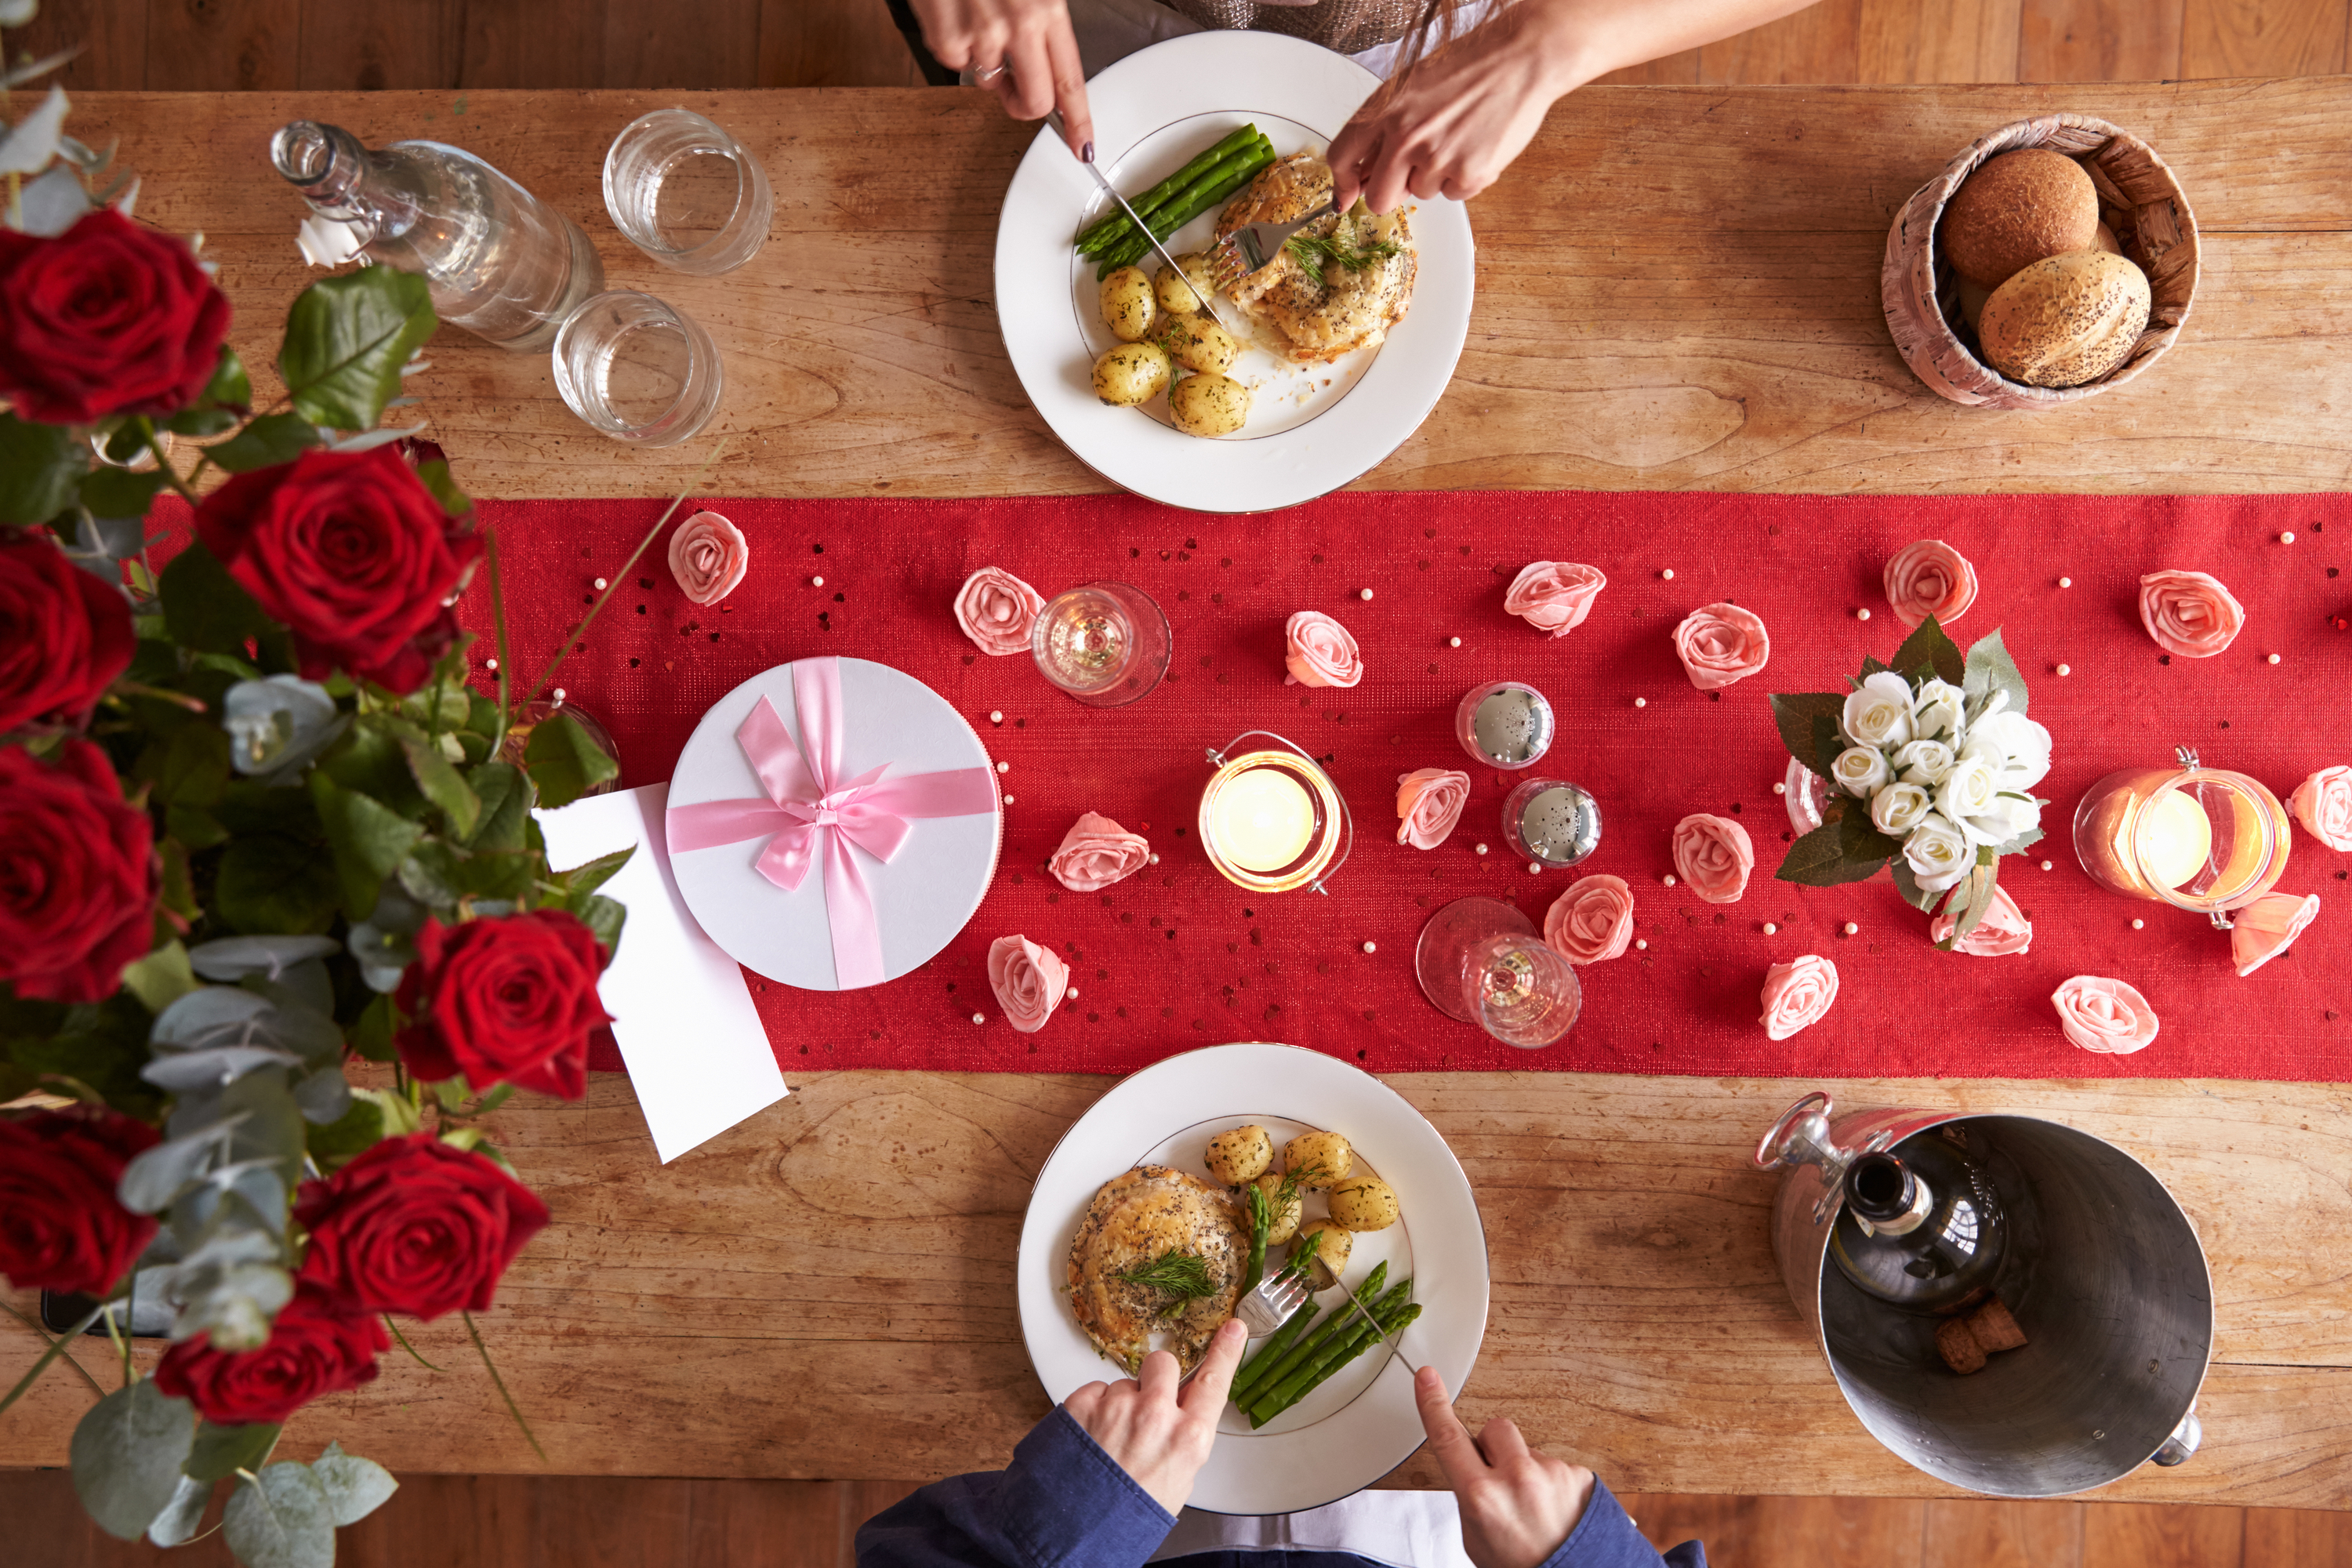 Is there anything better than creating your own home decor? These Valentine's sewing projects will having you falling in love with them. Try sewing your own table runner for your Valentine's dinner. 